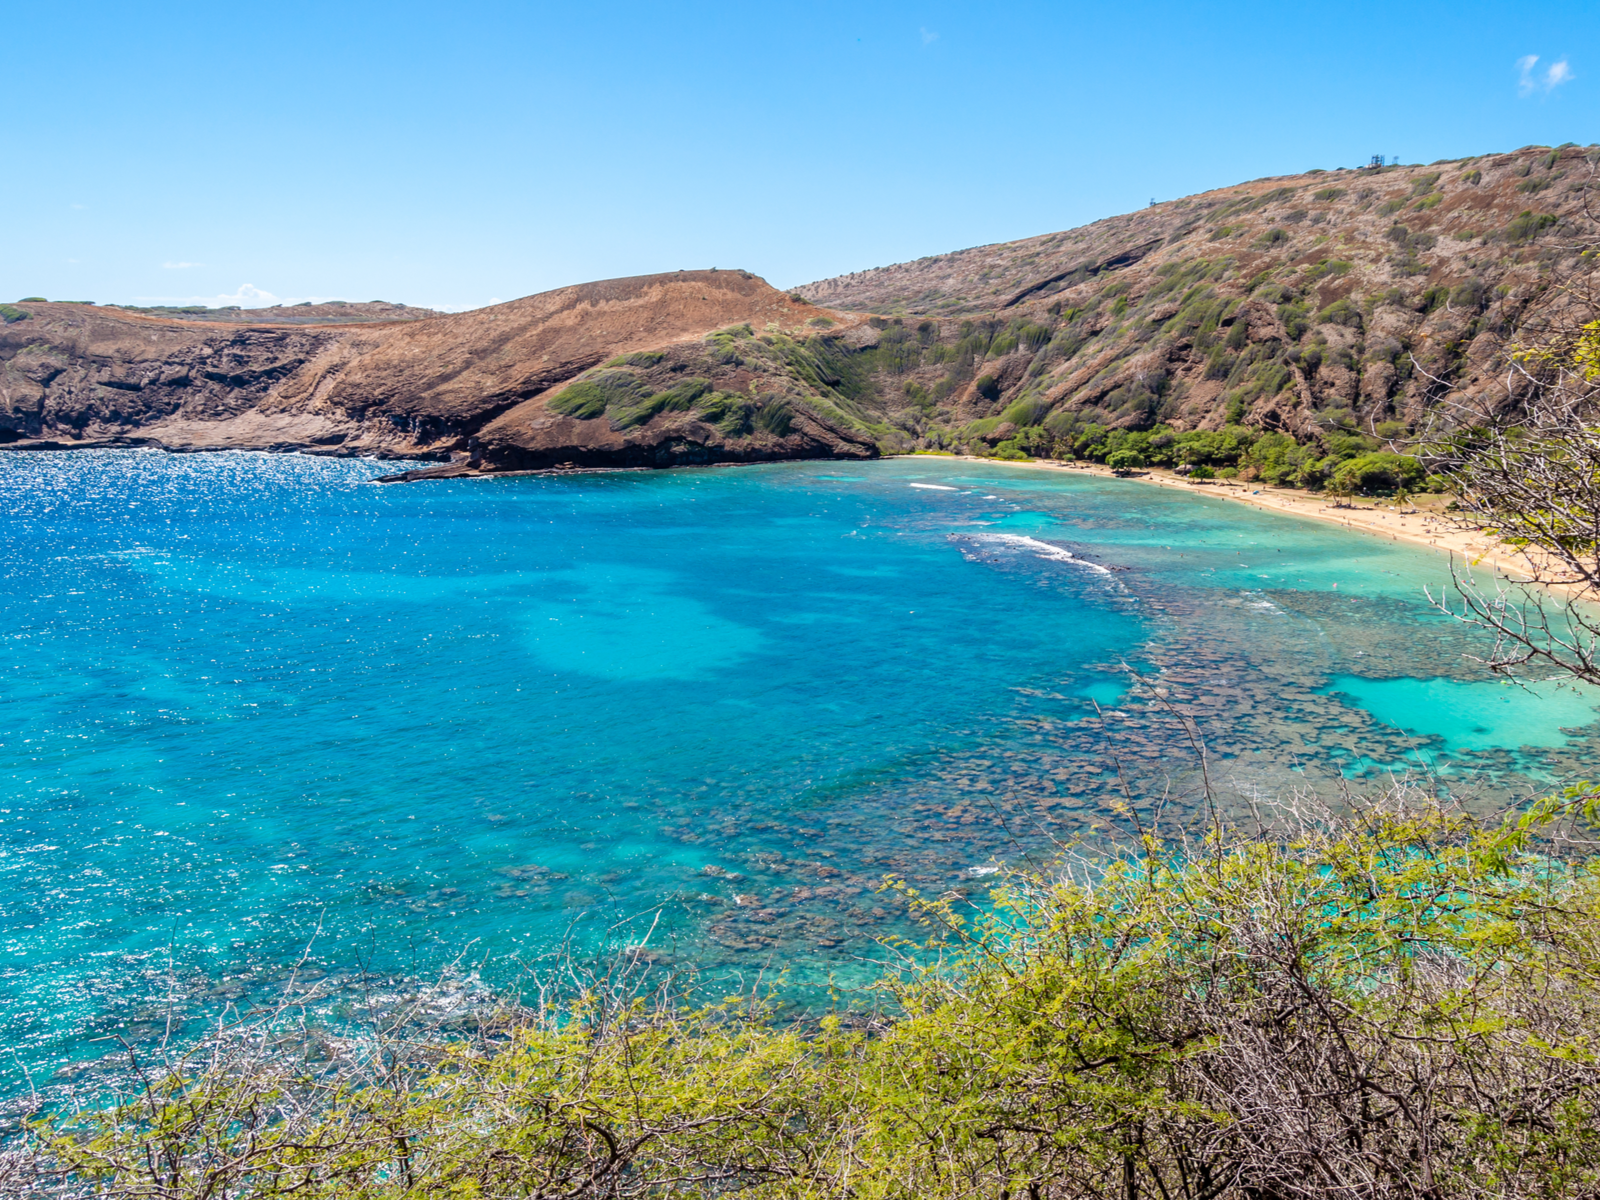 Honaunau Bay's calm and clear surface and beautiful coral reefs underwater makes it one of the best snorkeling spots in Hawaii